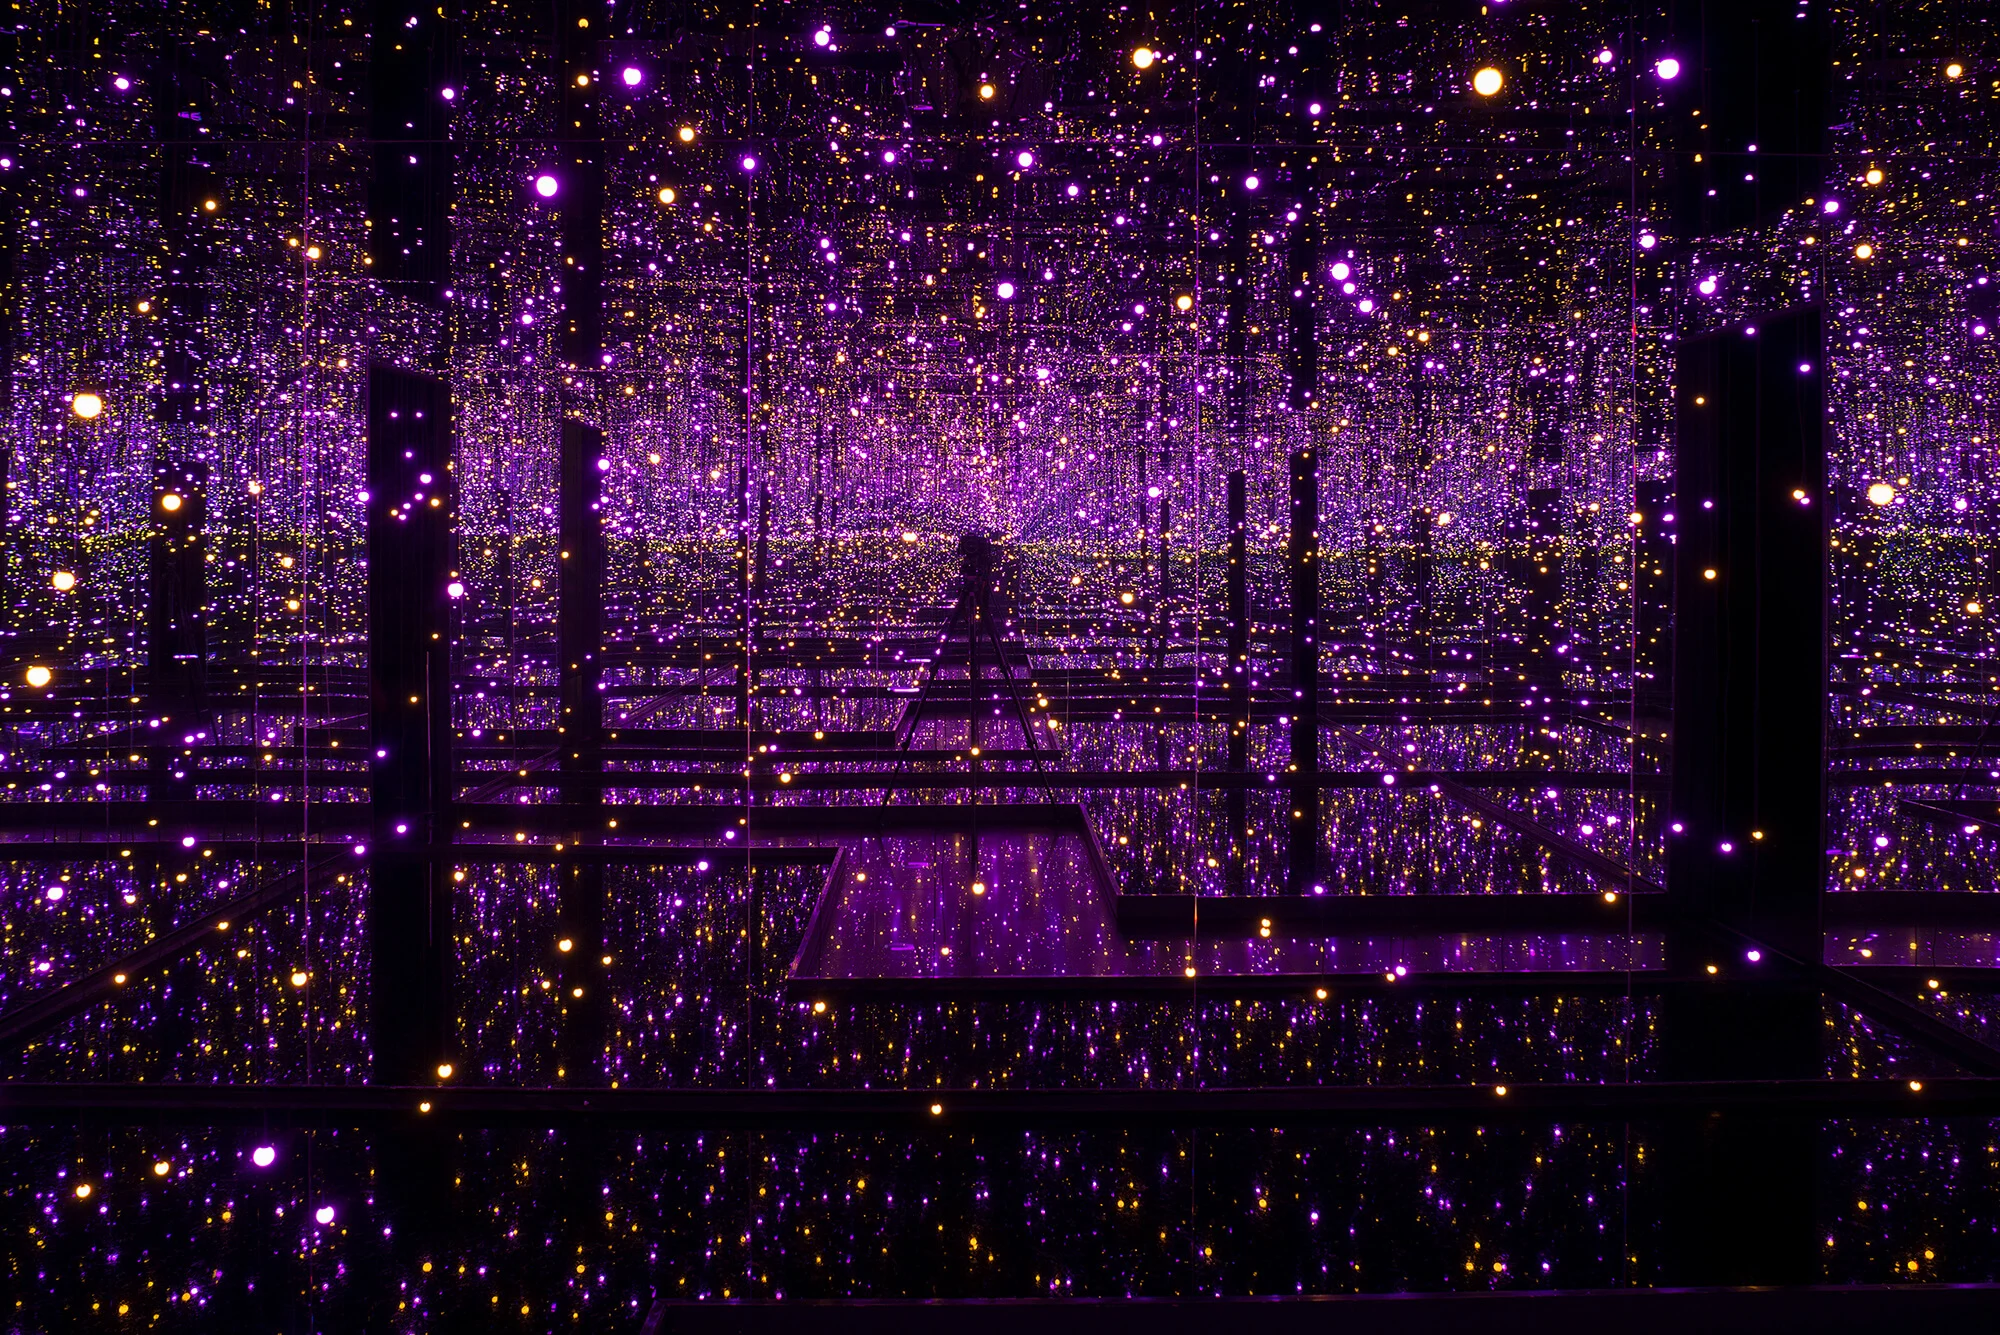 Yayoi Kusama Infinity Mirrored Room, Filled with the Brilliance of Life, 2011. Room with mirror, LED lights, water pool. 296 x 622.4 x 622.4 cm, 116 1/2 x 245 1/8 x 245 1/8 in